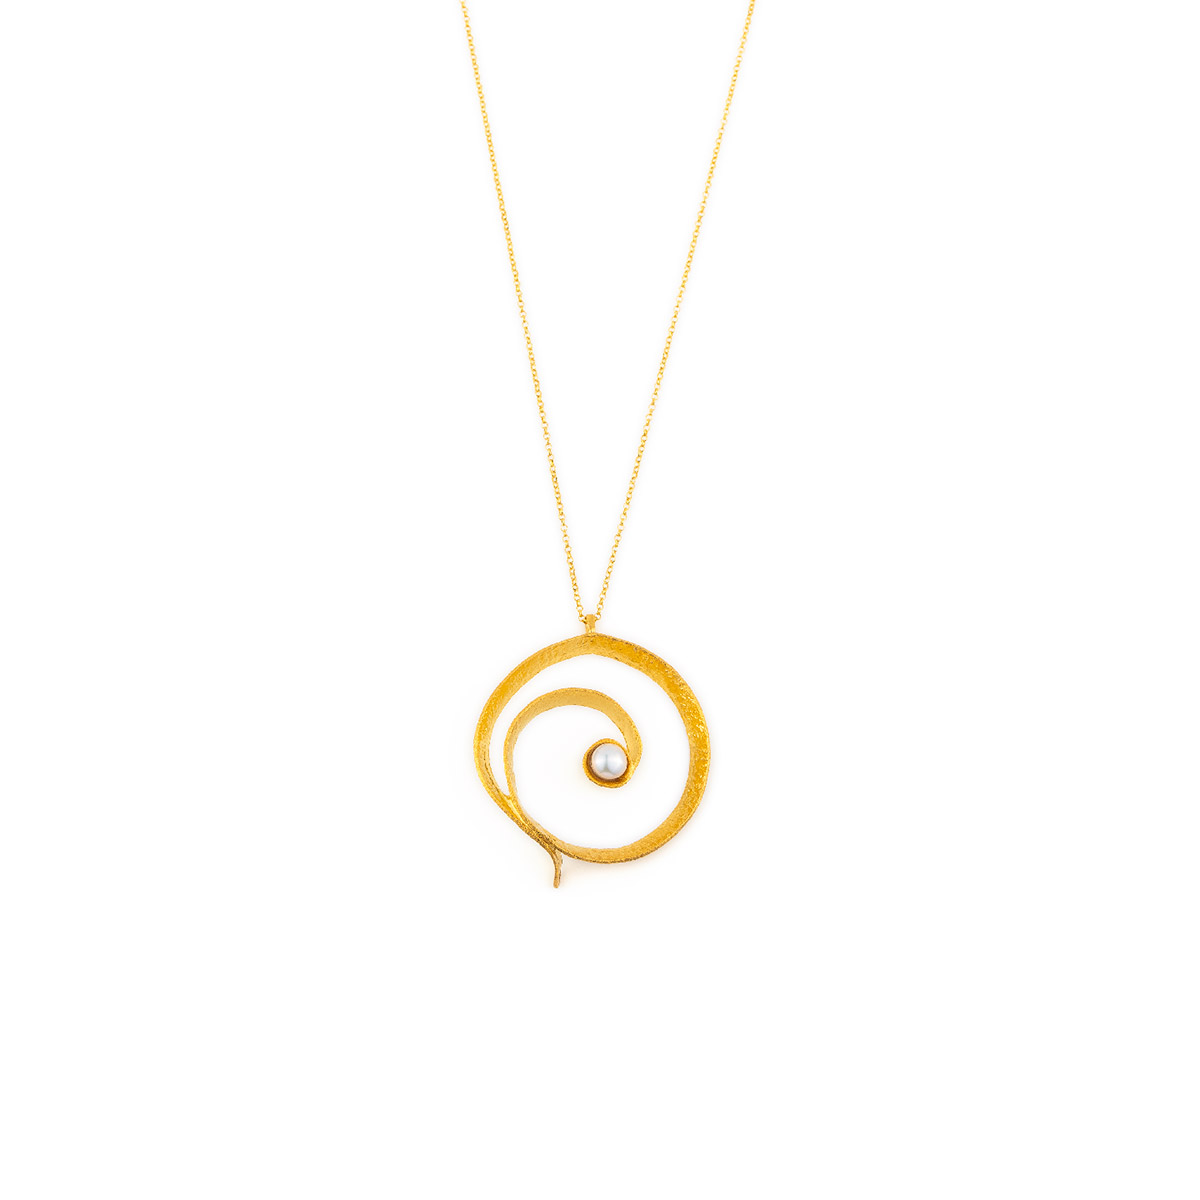 Pearl Circle Necklace - Sterling Silver Gold Plated